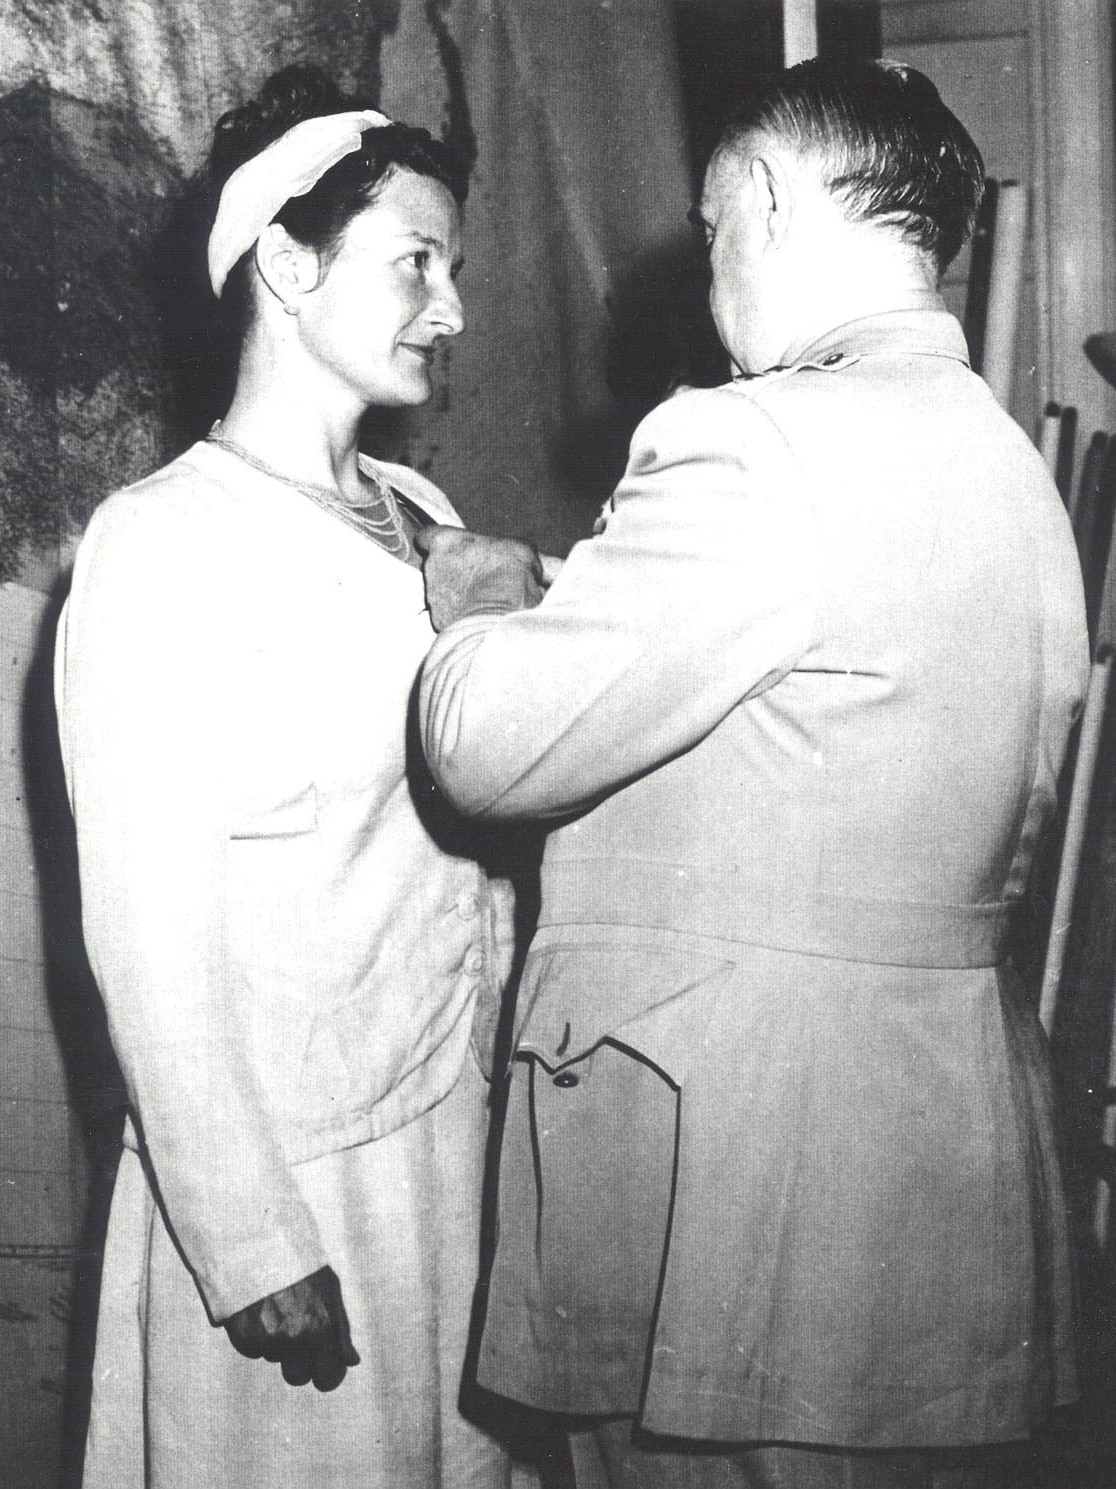 virginia hall receiving the distinguished service cross in 1945